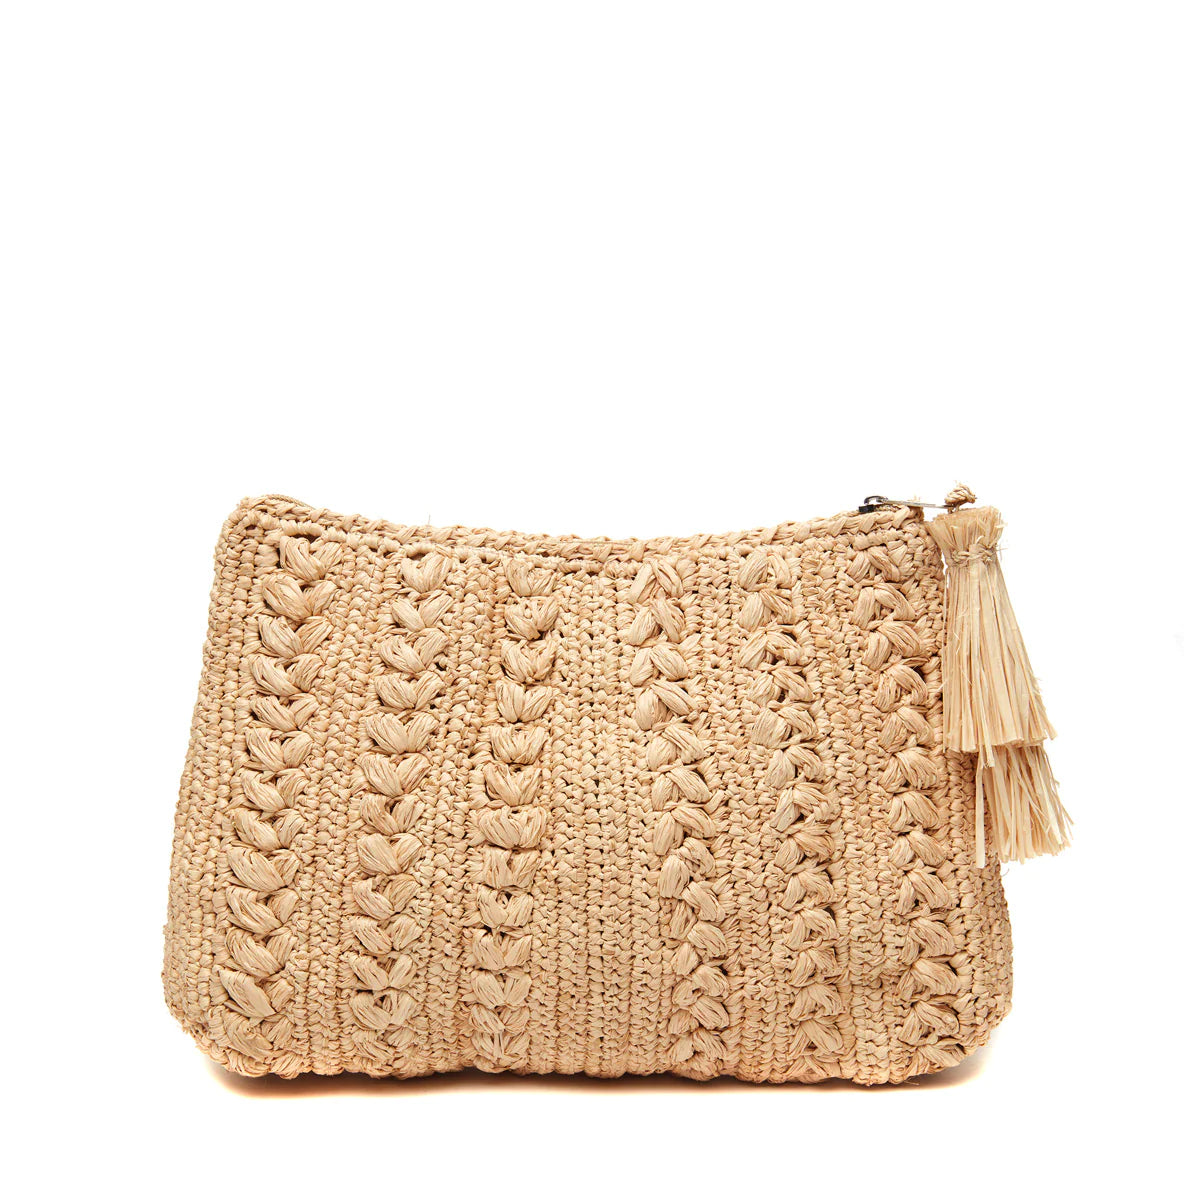 Ivy Crocheted Clutch